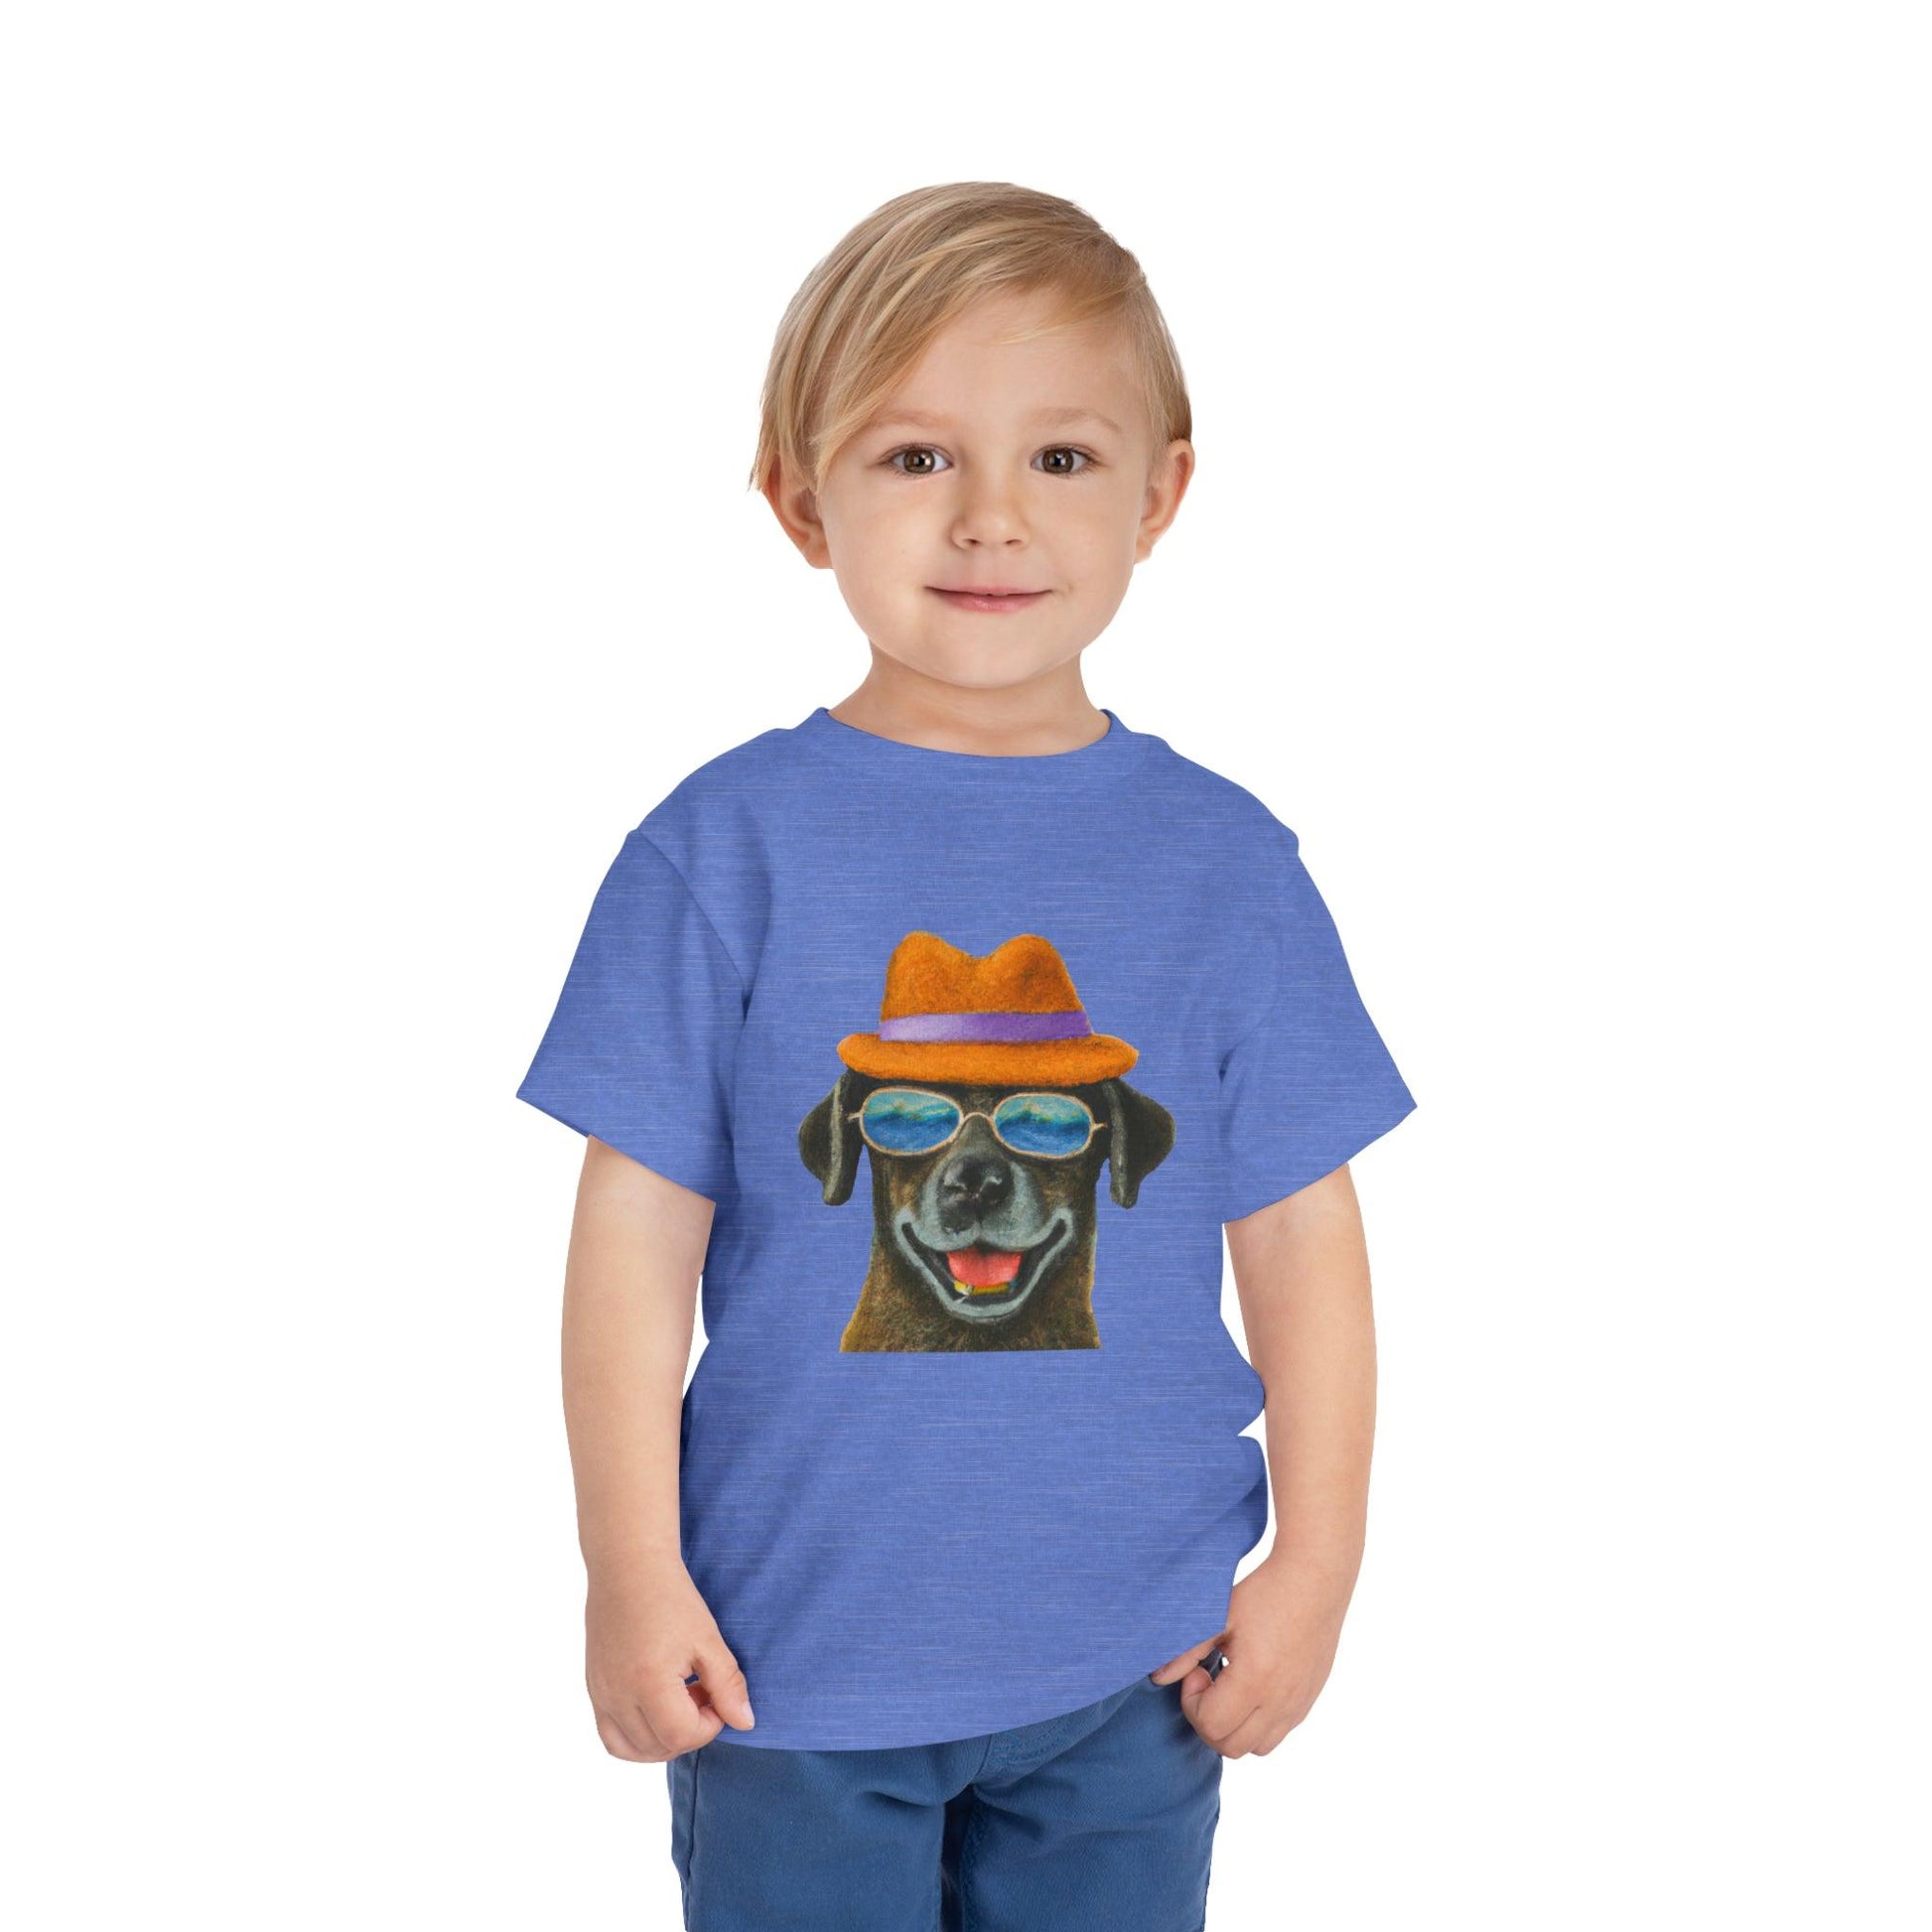 Dog at the beach wearing a hat and sunglasses painted art Toddler Short Sleeve Tee - Giftsmojo